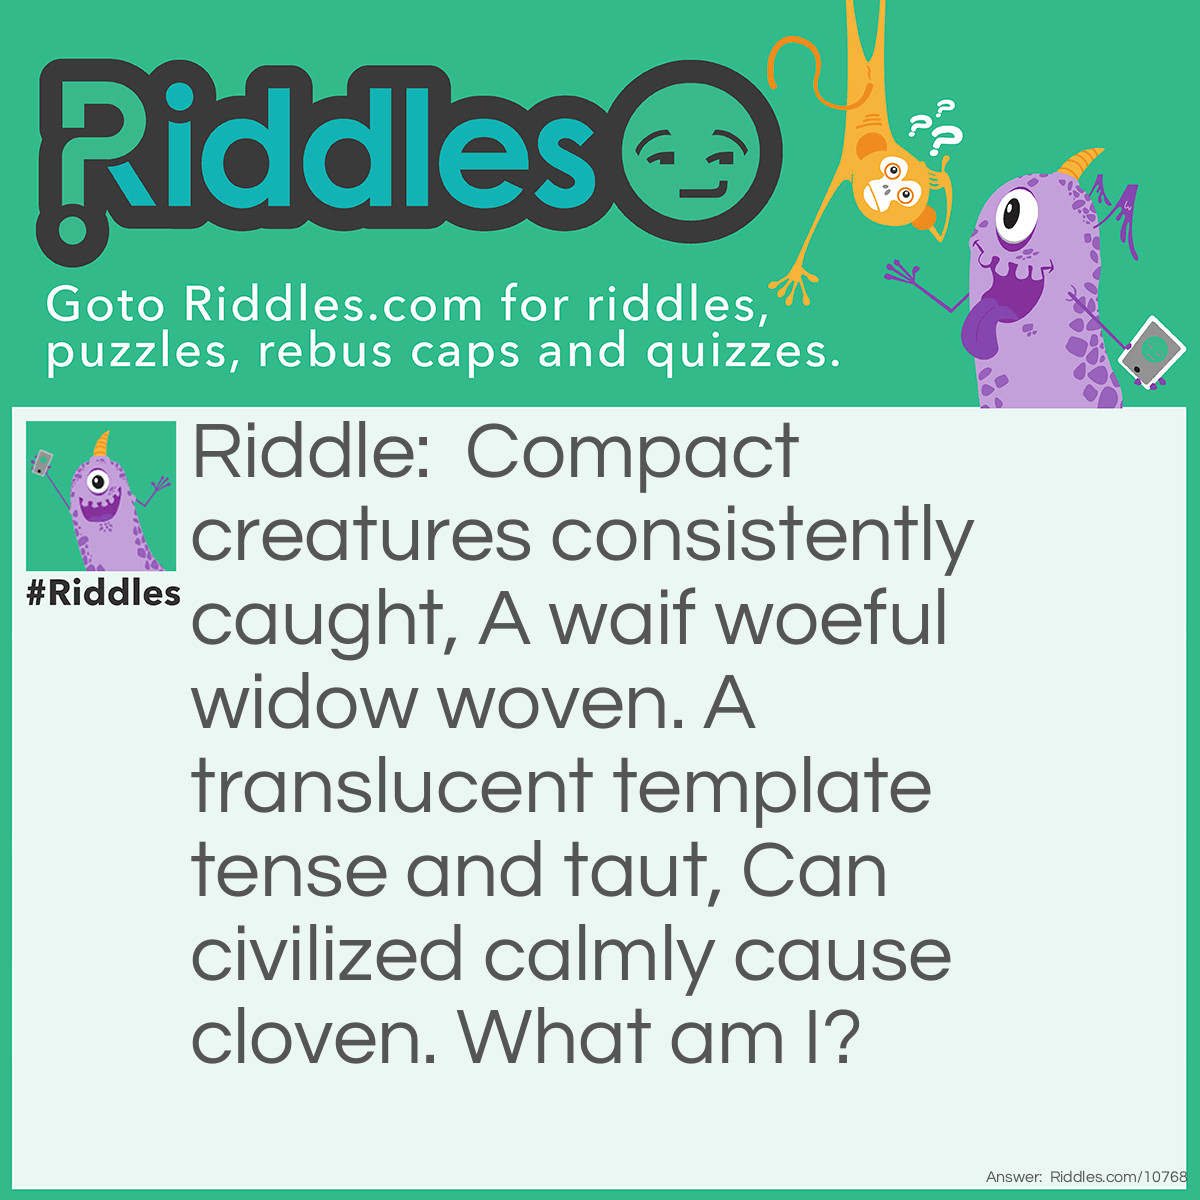 Riddle: Compact creatures consistently caught, A waif woeful widow woven. A translucent template tense and taut, Can civilized calmly cause cloven. What am I? Answer: A spider's web.